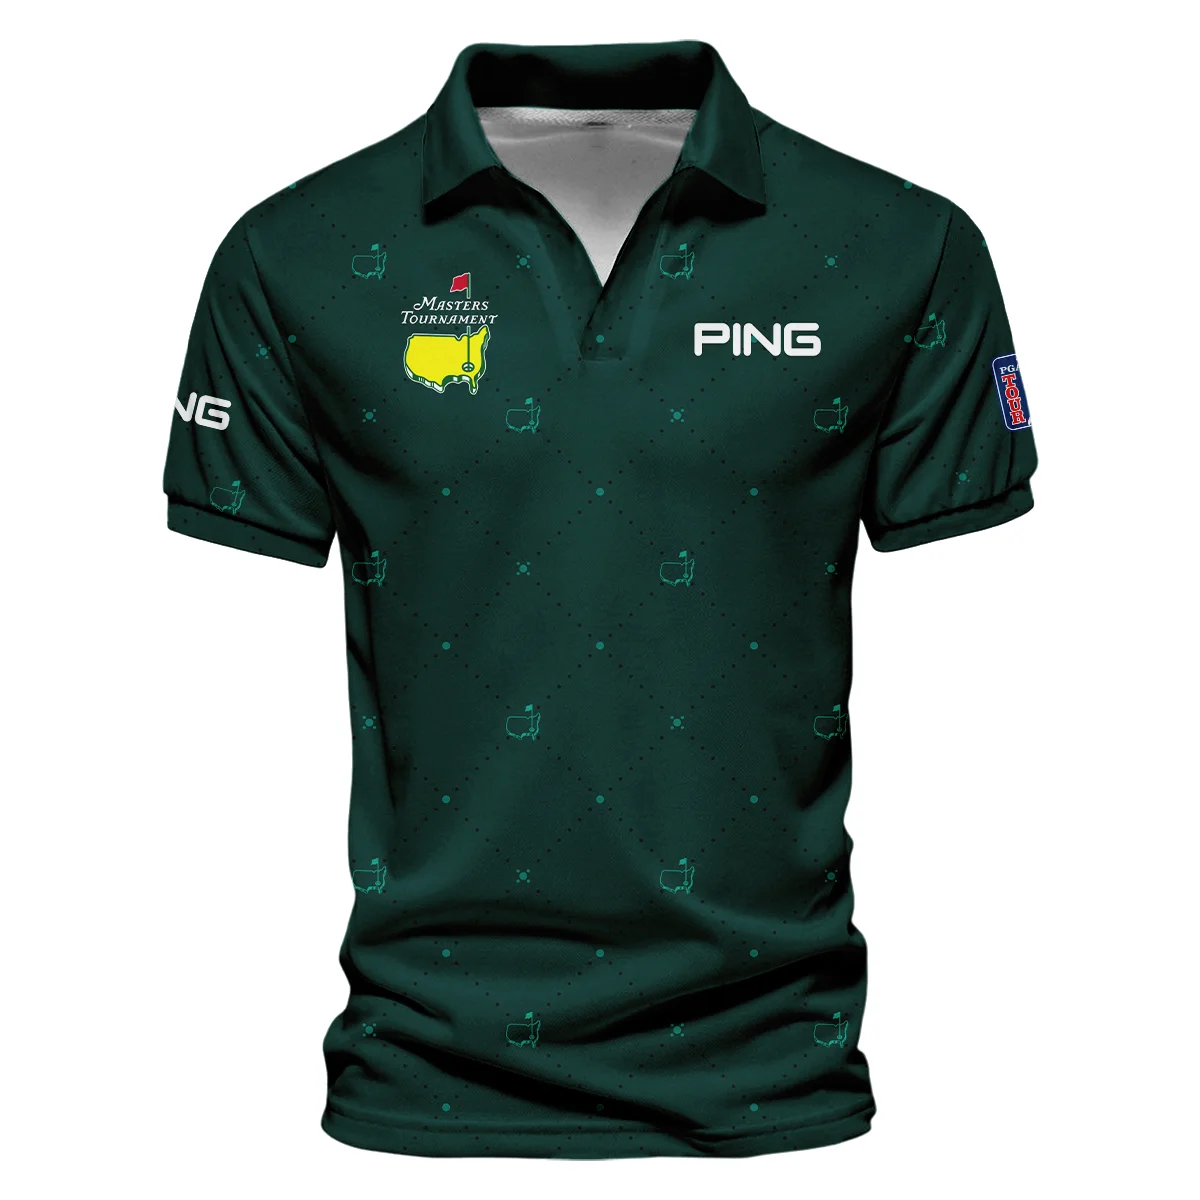 Dark Green Pattern In Retro Style With Logo Masters Tournament Ping Vneck Polo Shirt Style Classic Polo Shirt For Men